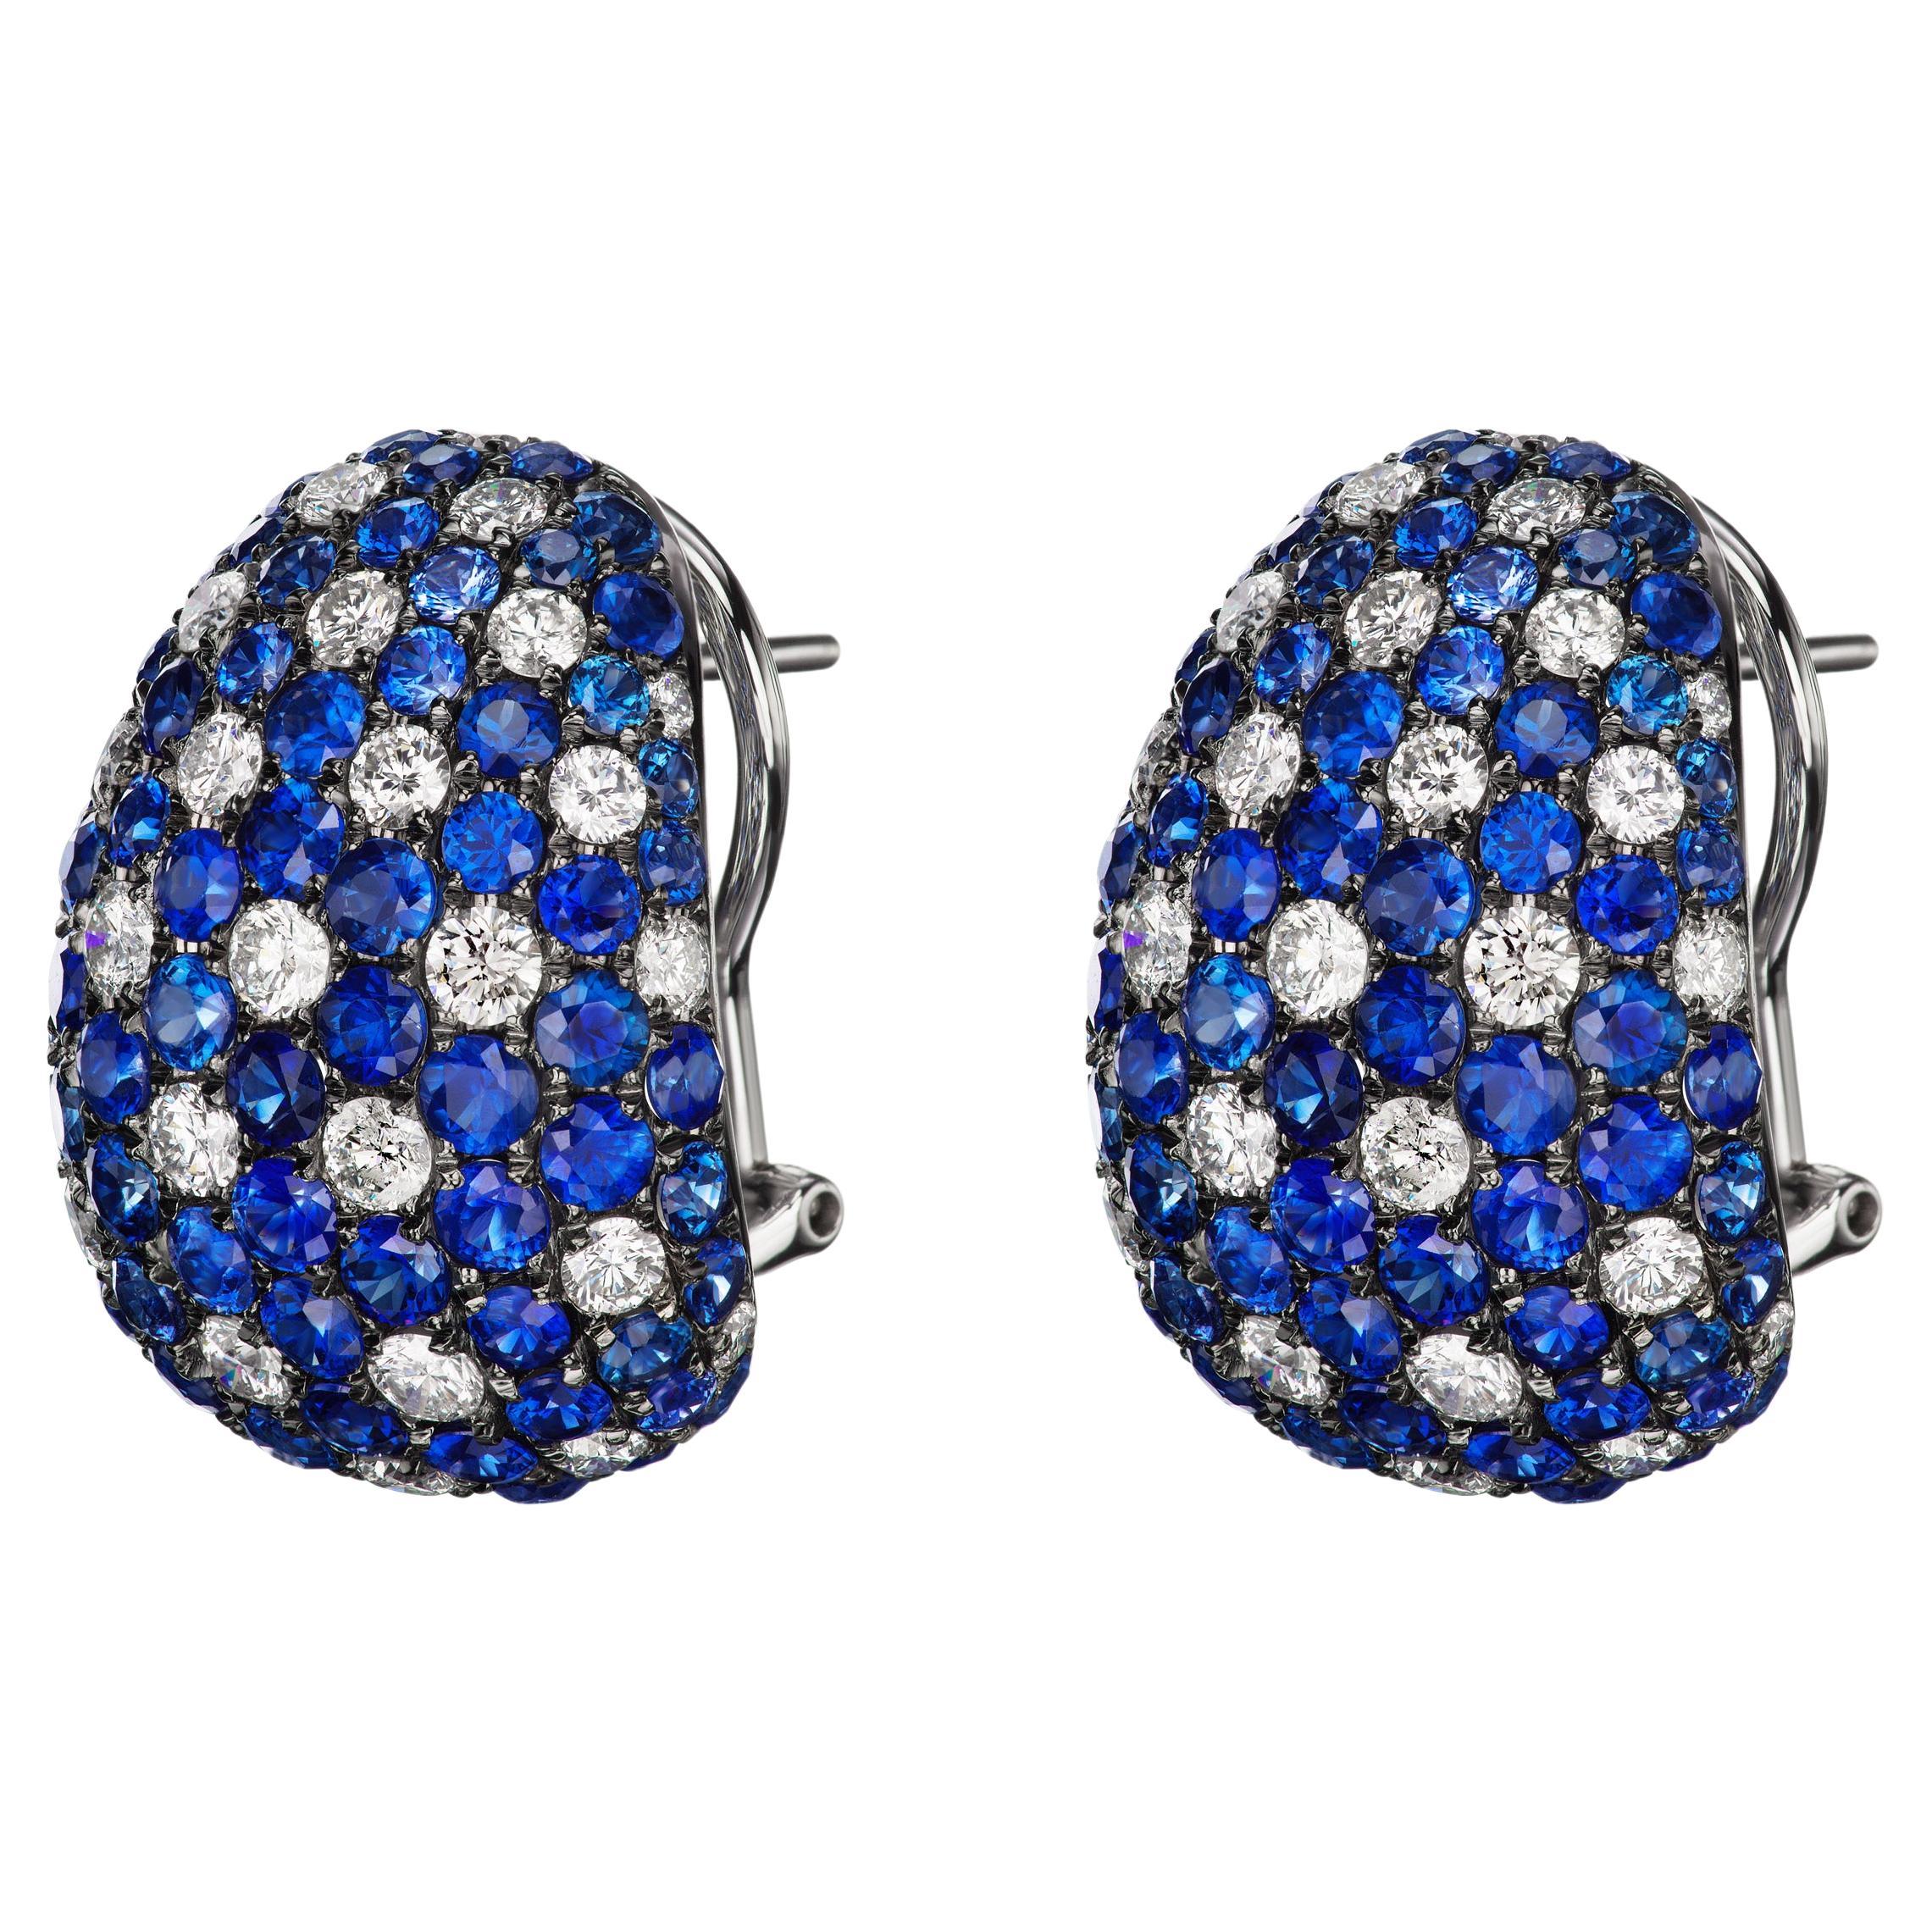 Nigaam 7.14 Cts. Blue Sapphire with Diamond Stud Earrings in 18K White Gold